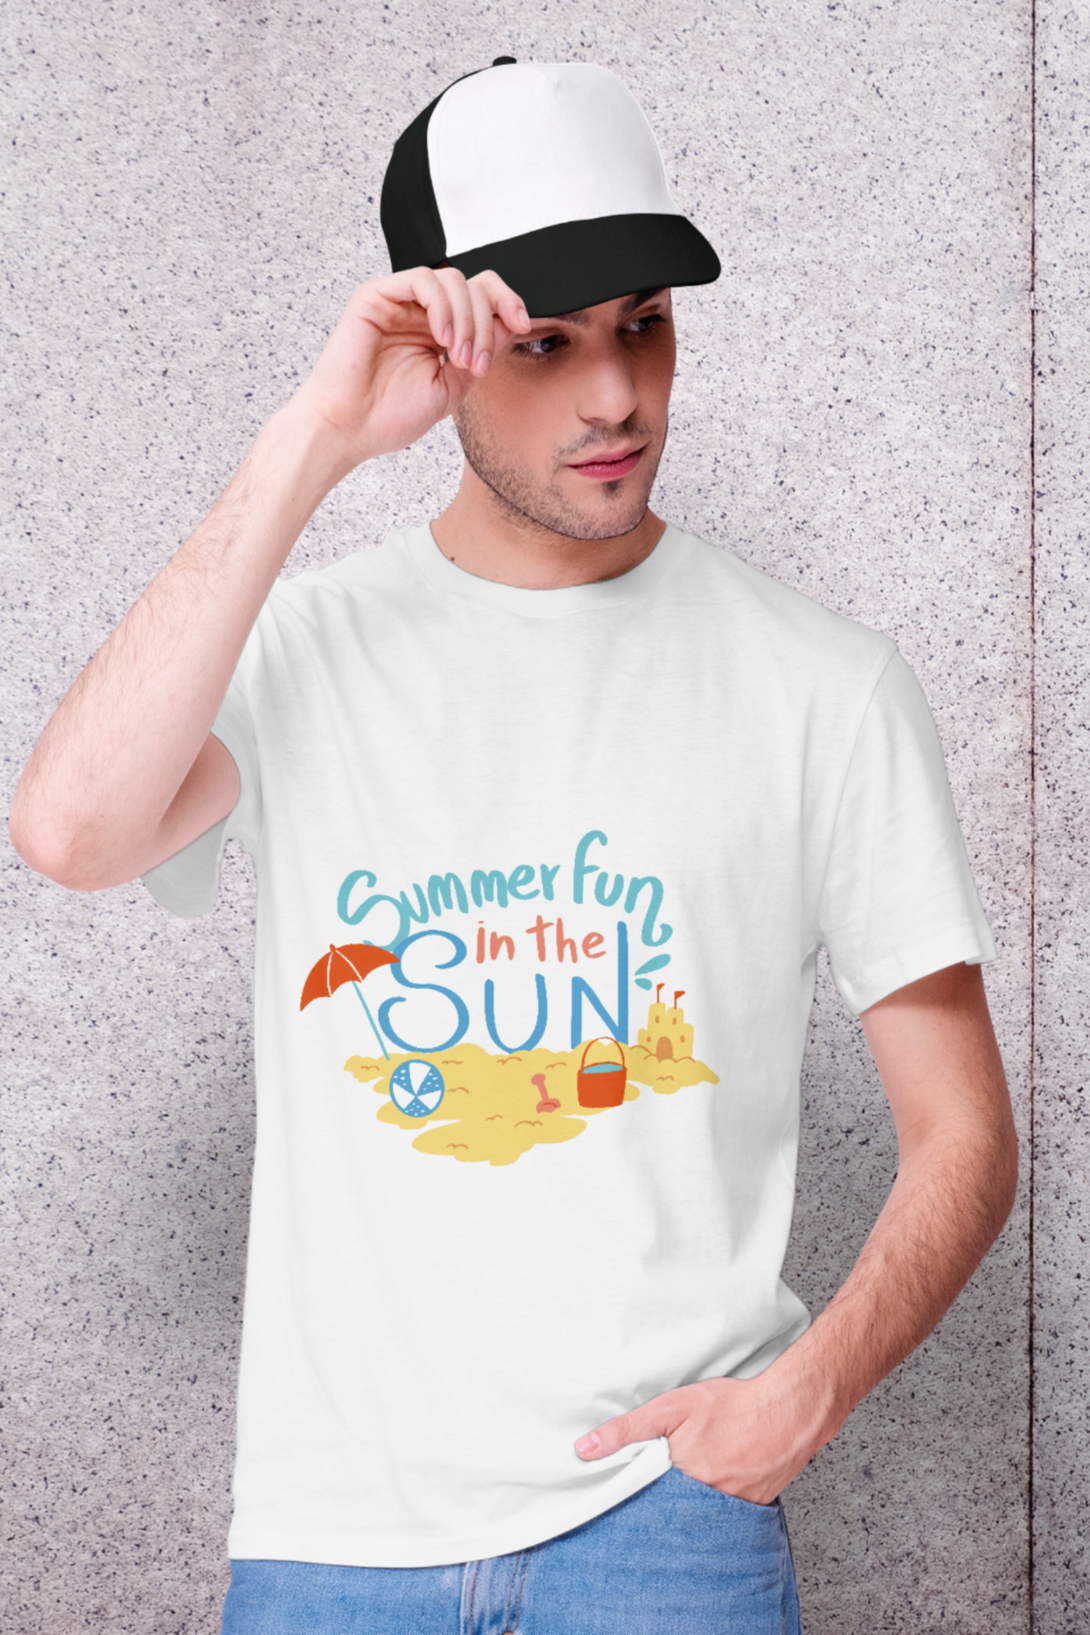 Summer Fun In The Sun White Printed T-Shirt For Men - WowWaves - 8